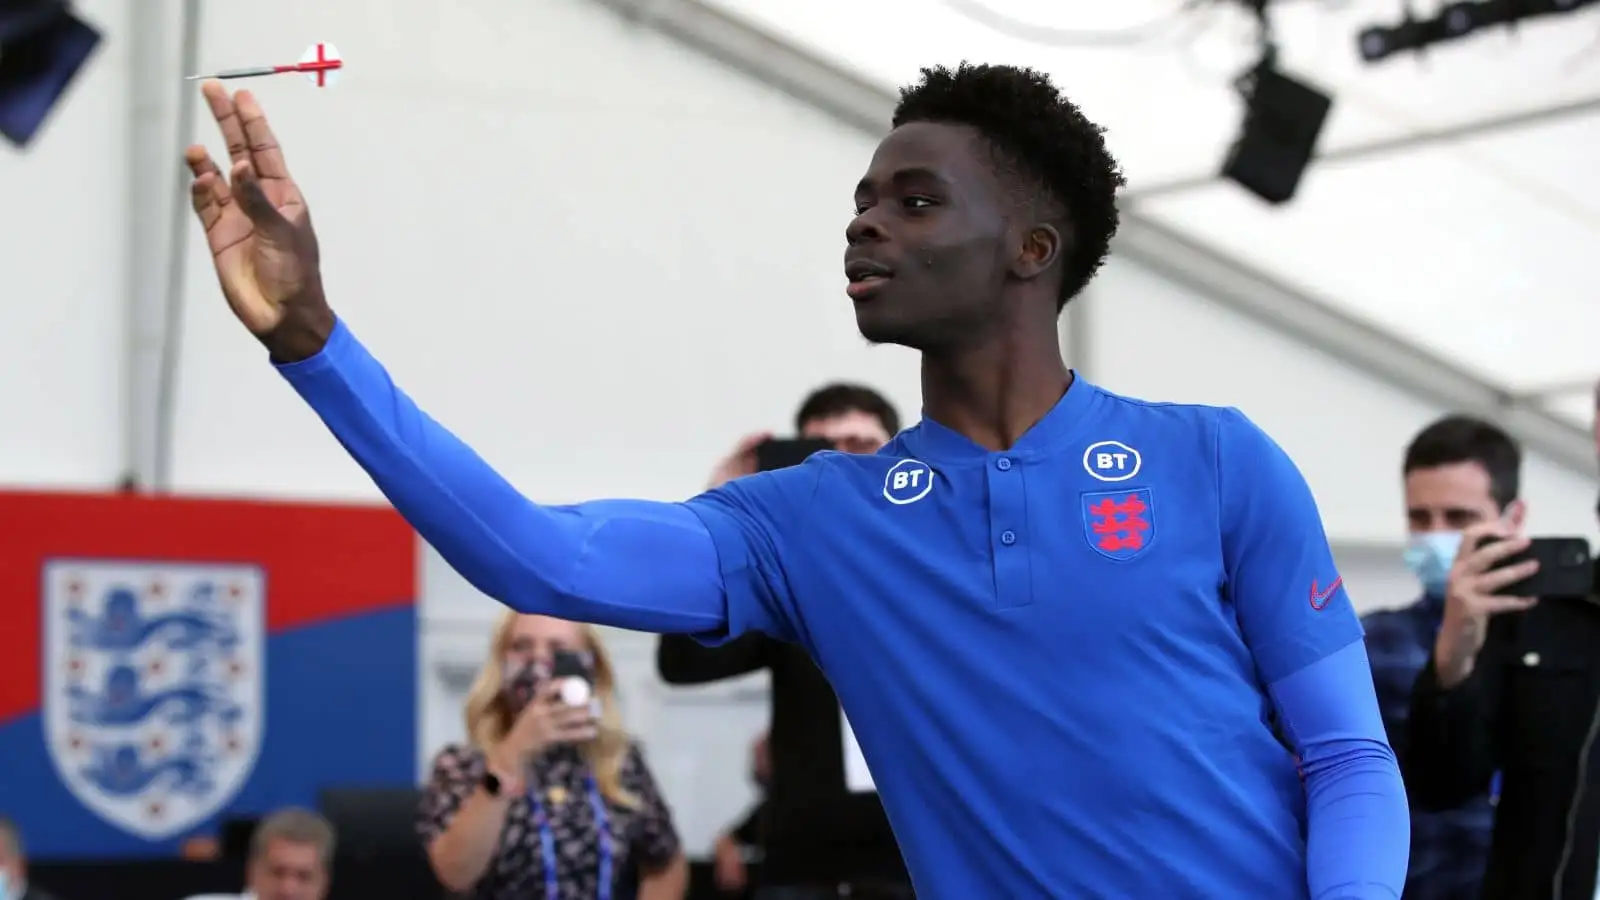 Bukayo Saka playing darts, England media day, World Cup 2022 preview St George's Park